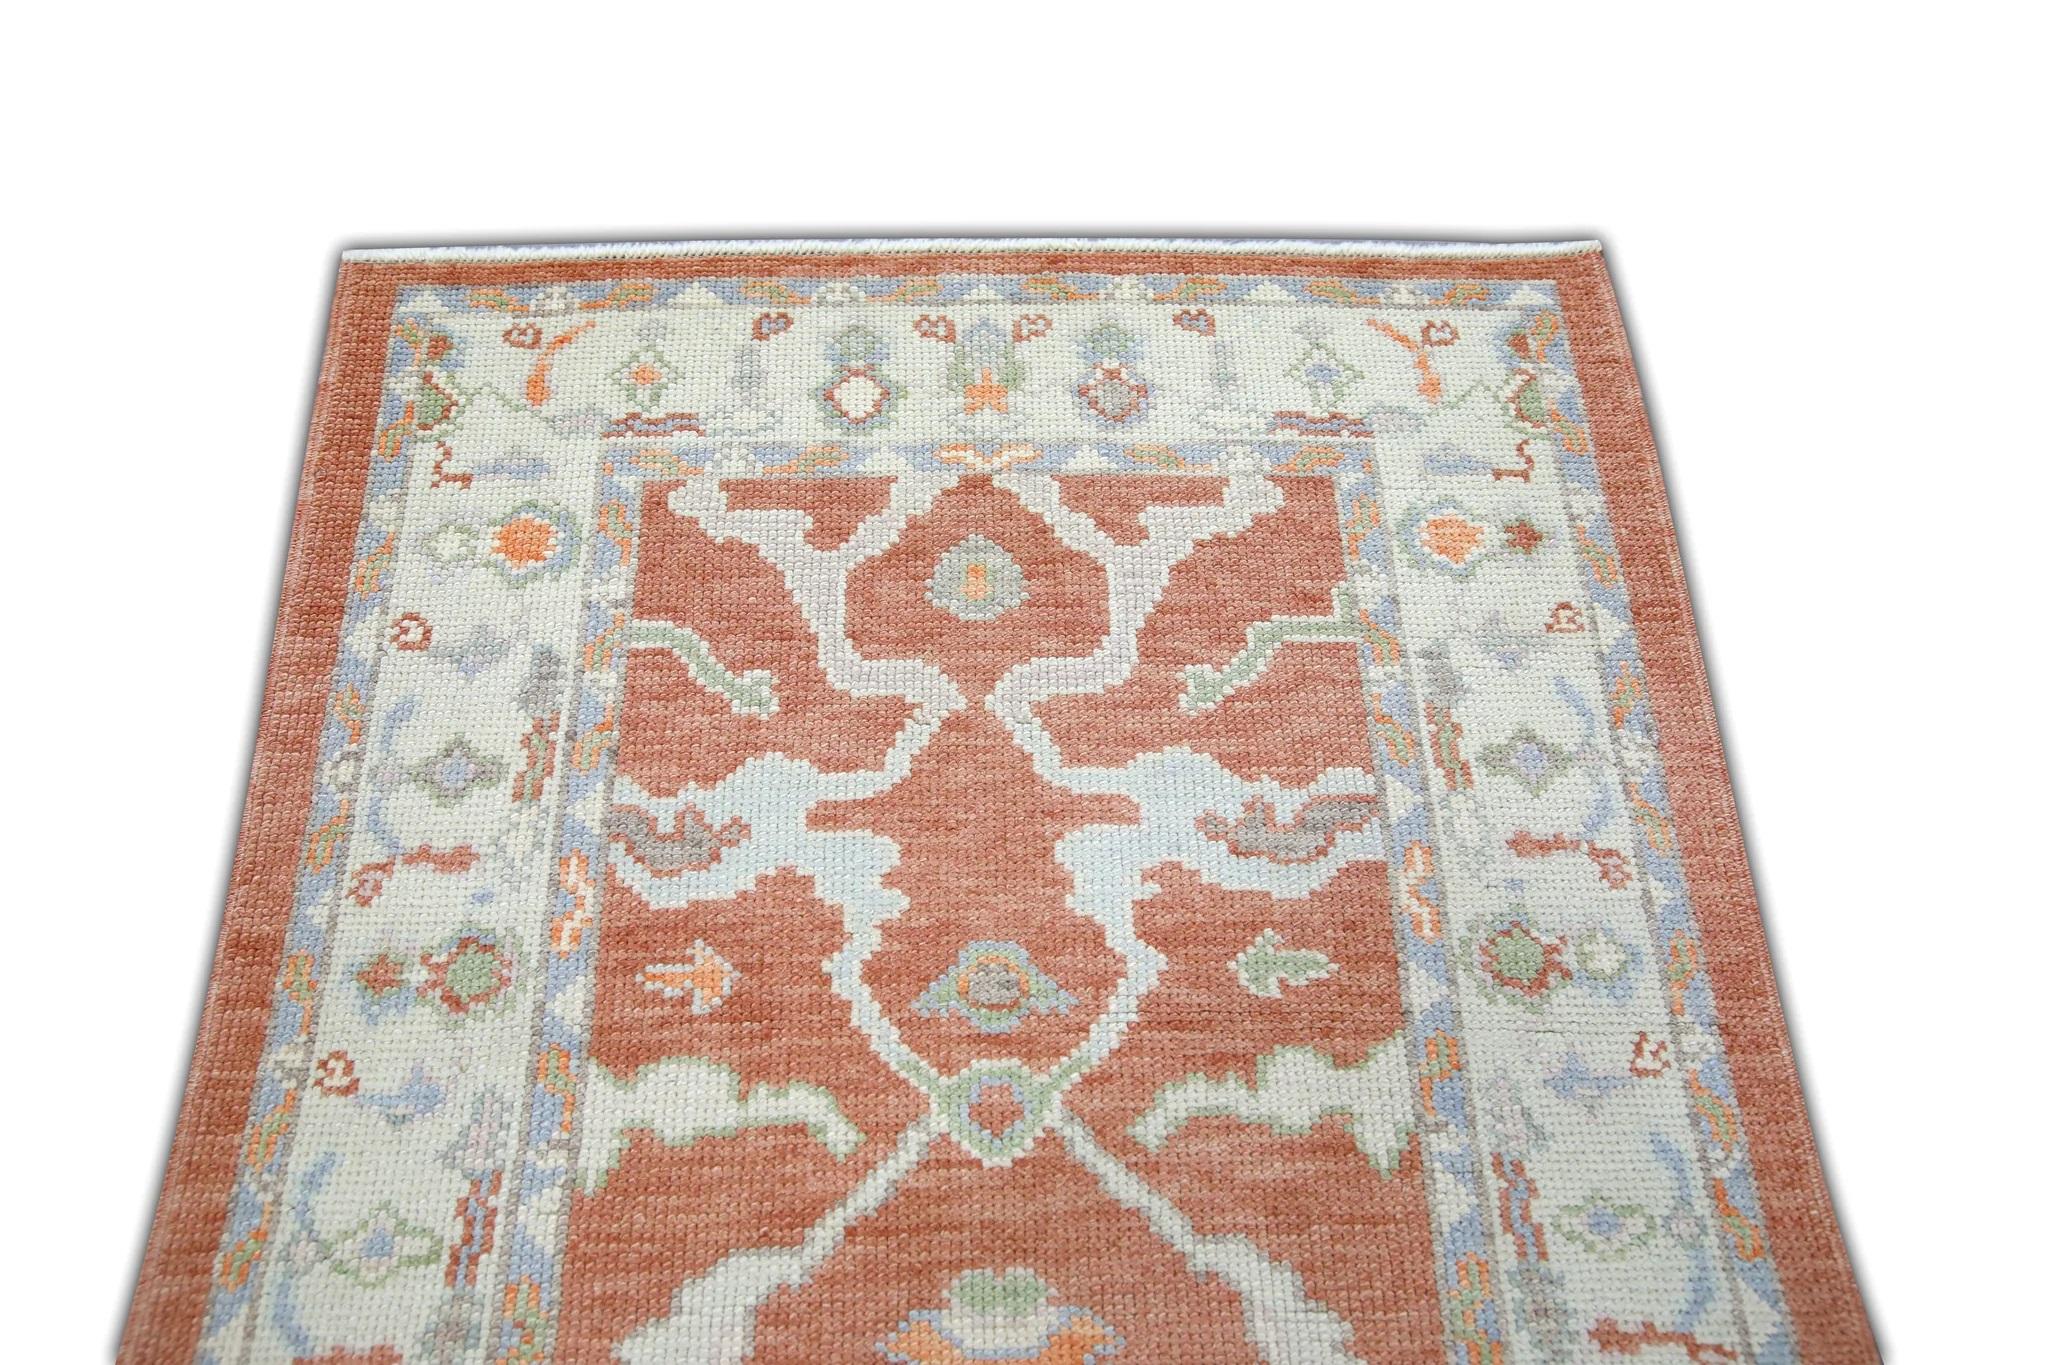 All-Over Floral Handwoven Turkish Oushak Rug in Coral, Cream, and Blue 3'2 x 5'1 In New Condition For Sale In Houston, TX